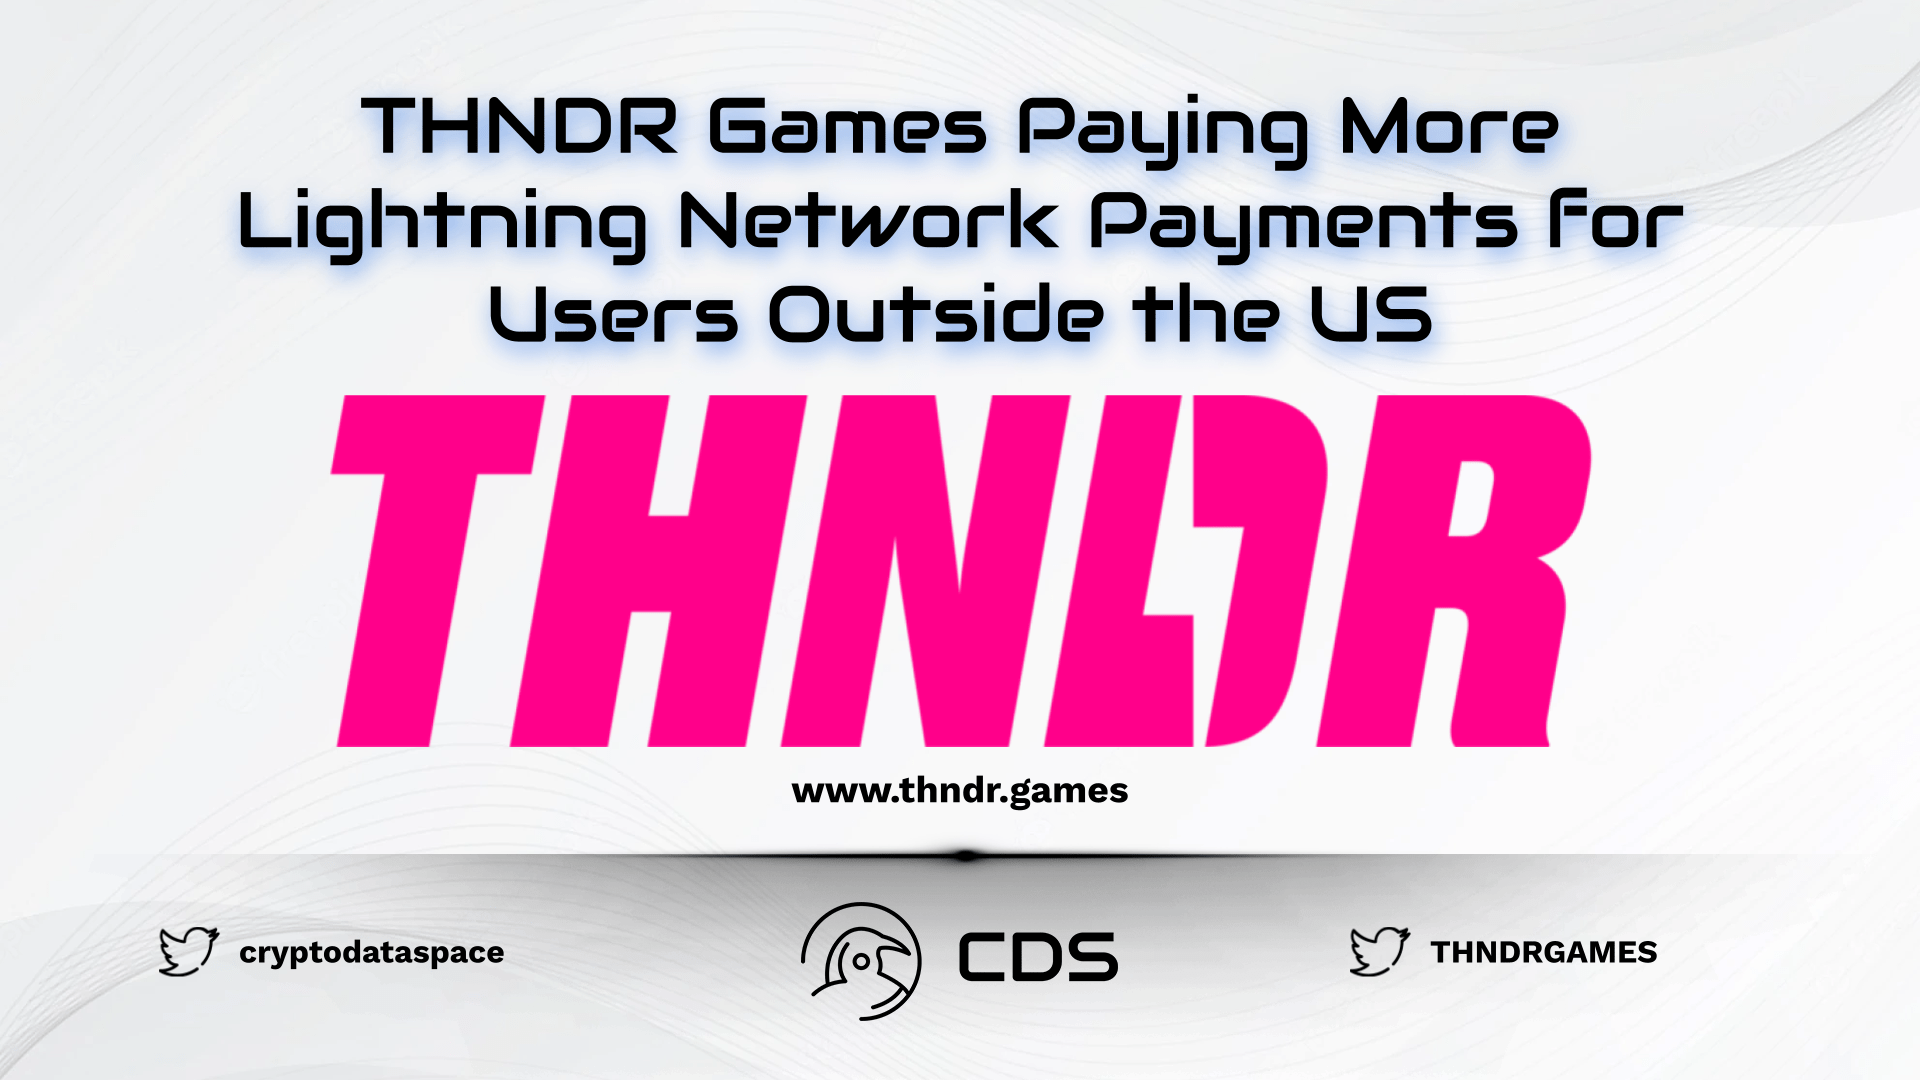 THNDR Games Paying More Lightning Network Payments for Users Outside the US